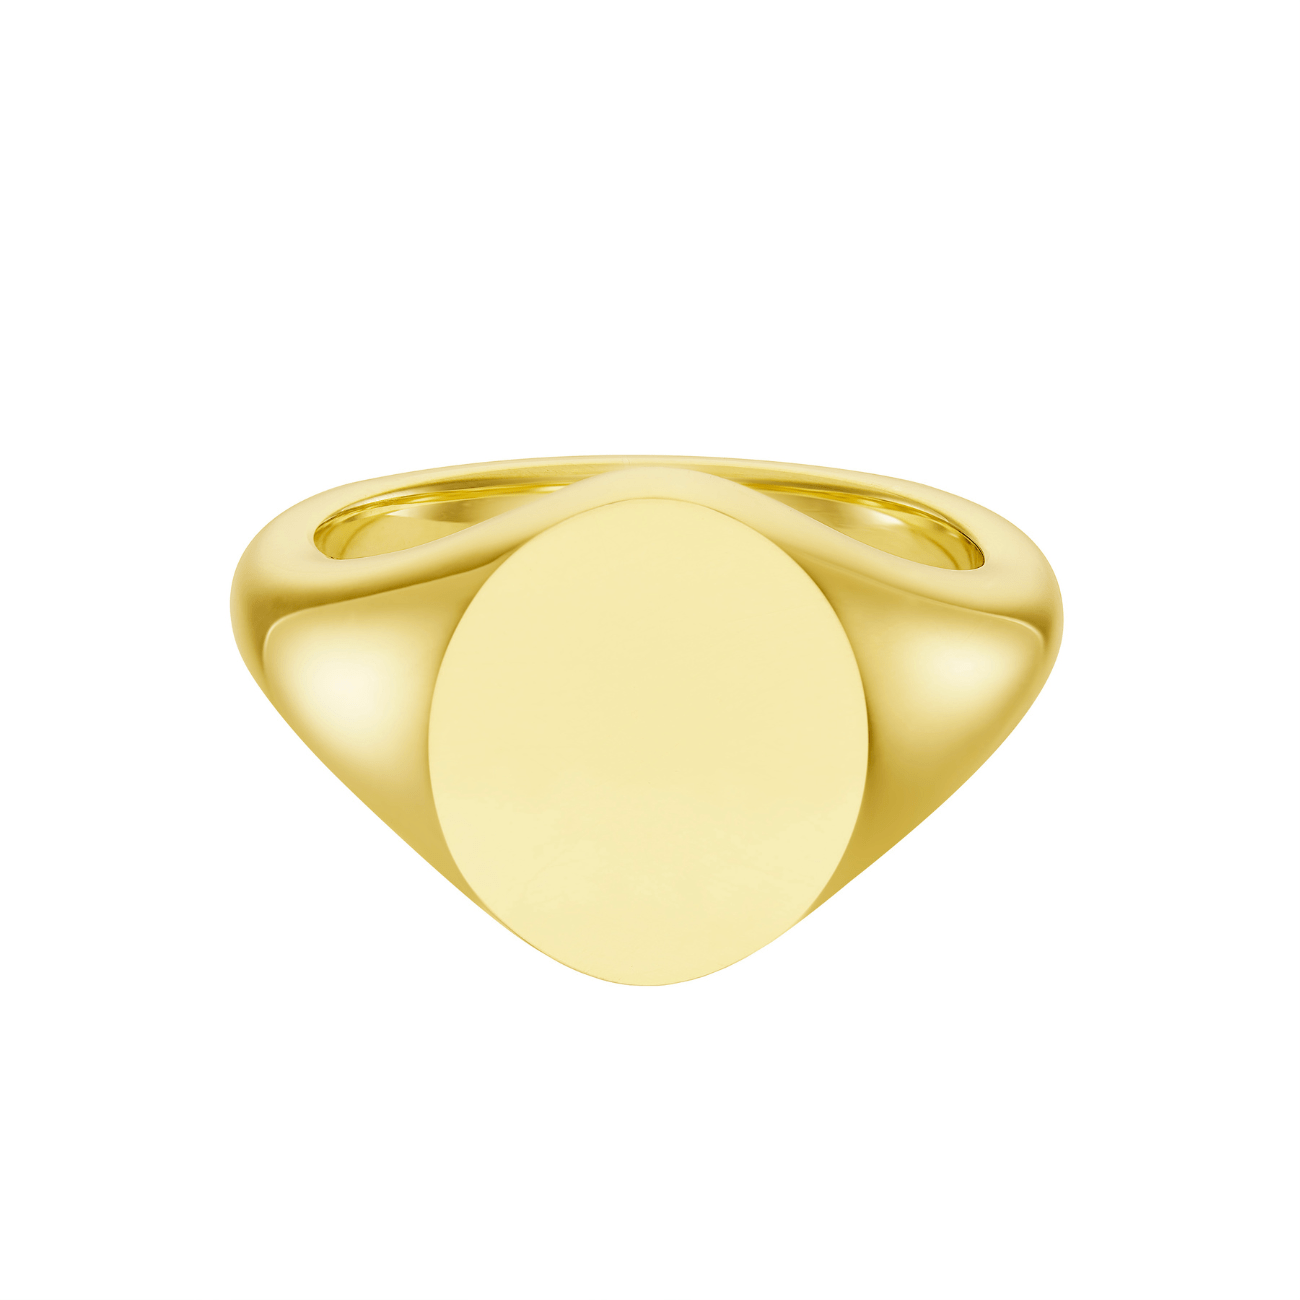 Gold Oval Signet Ring (14X11.5MM) | Deakin & Francis USA